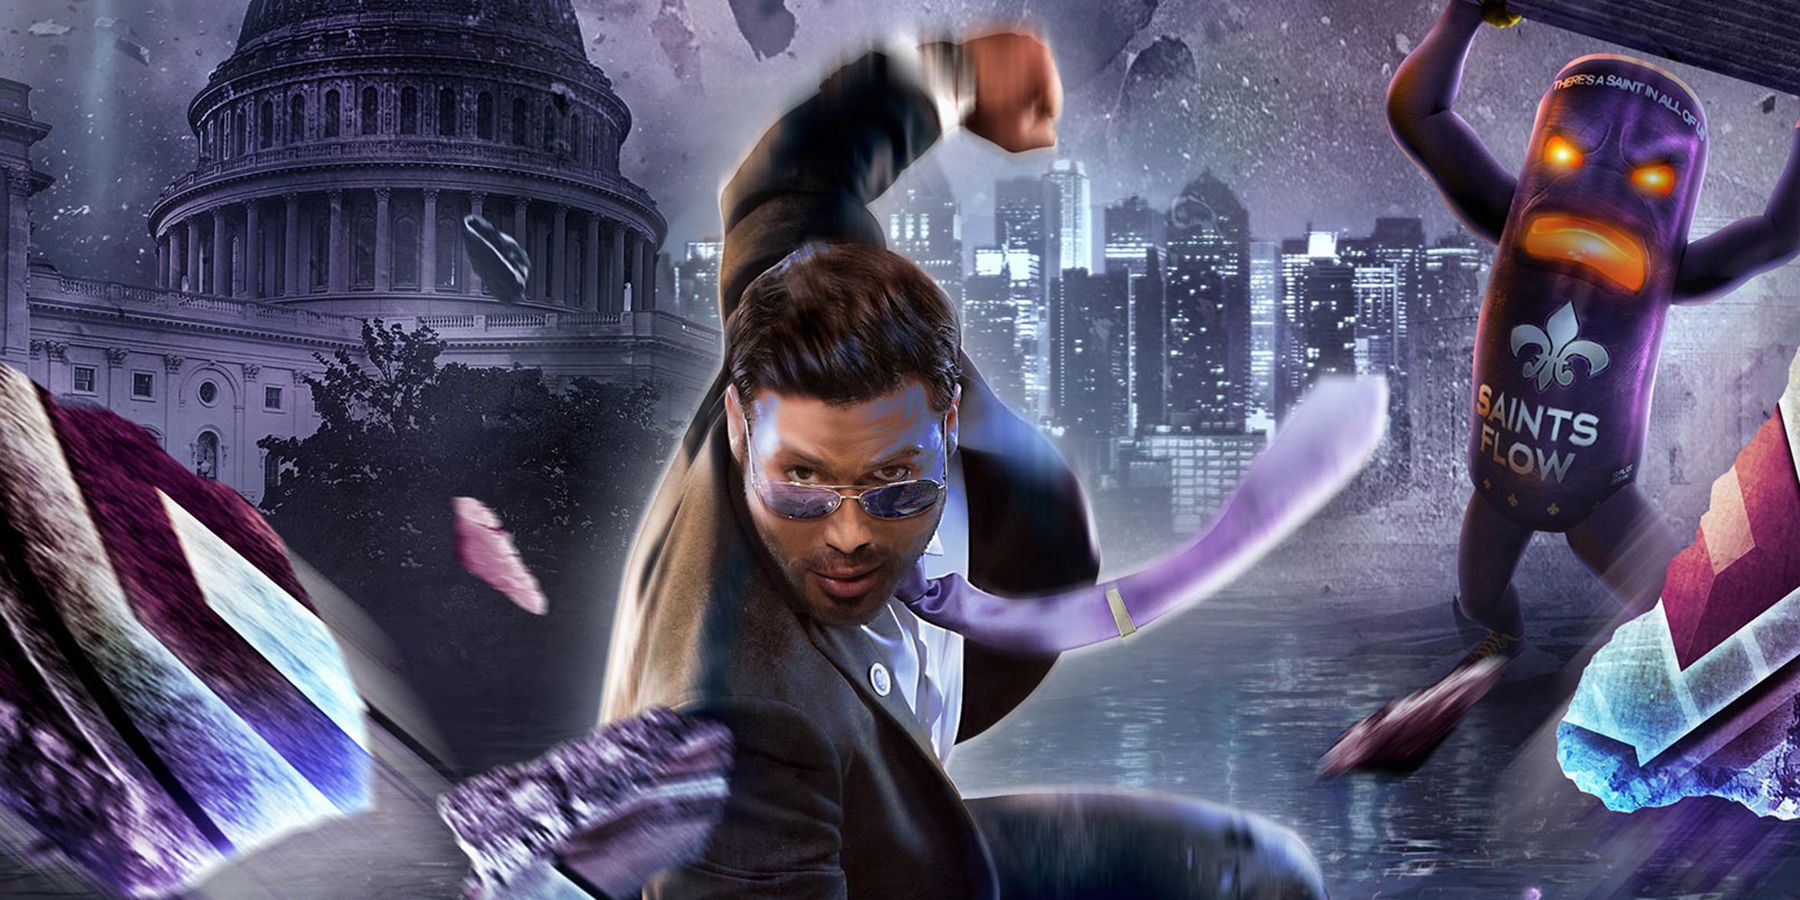 Saints Row reboots, returns to its roots with new gang and a new